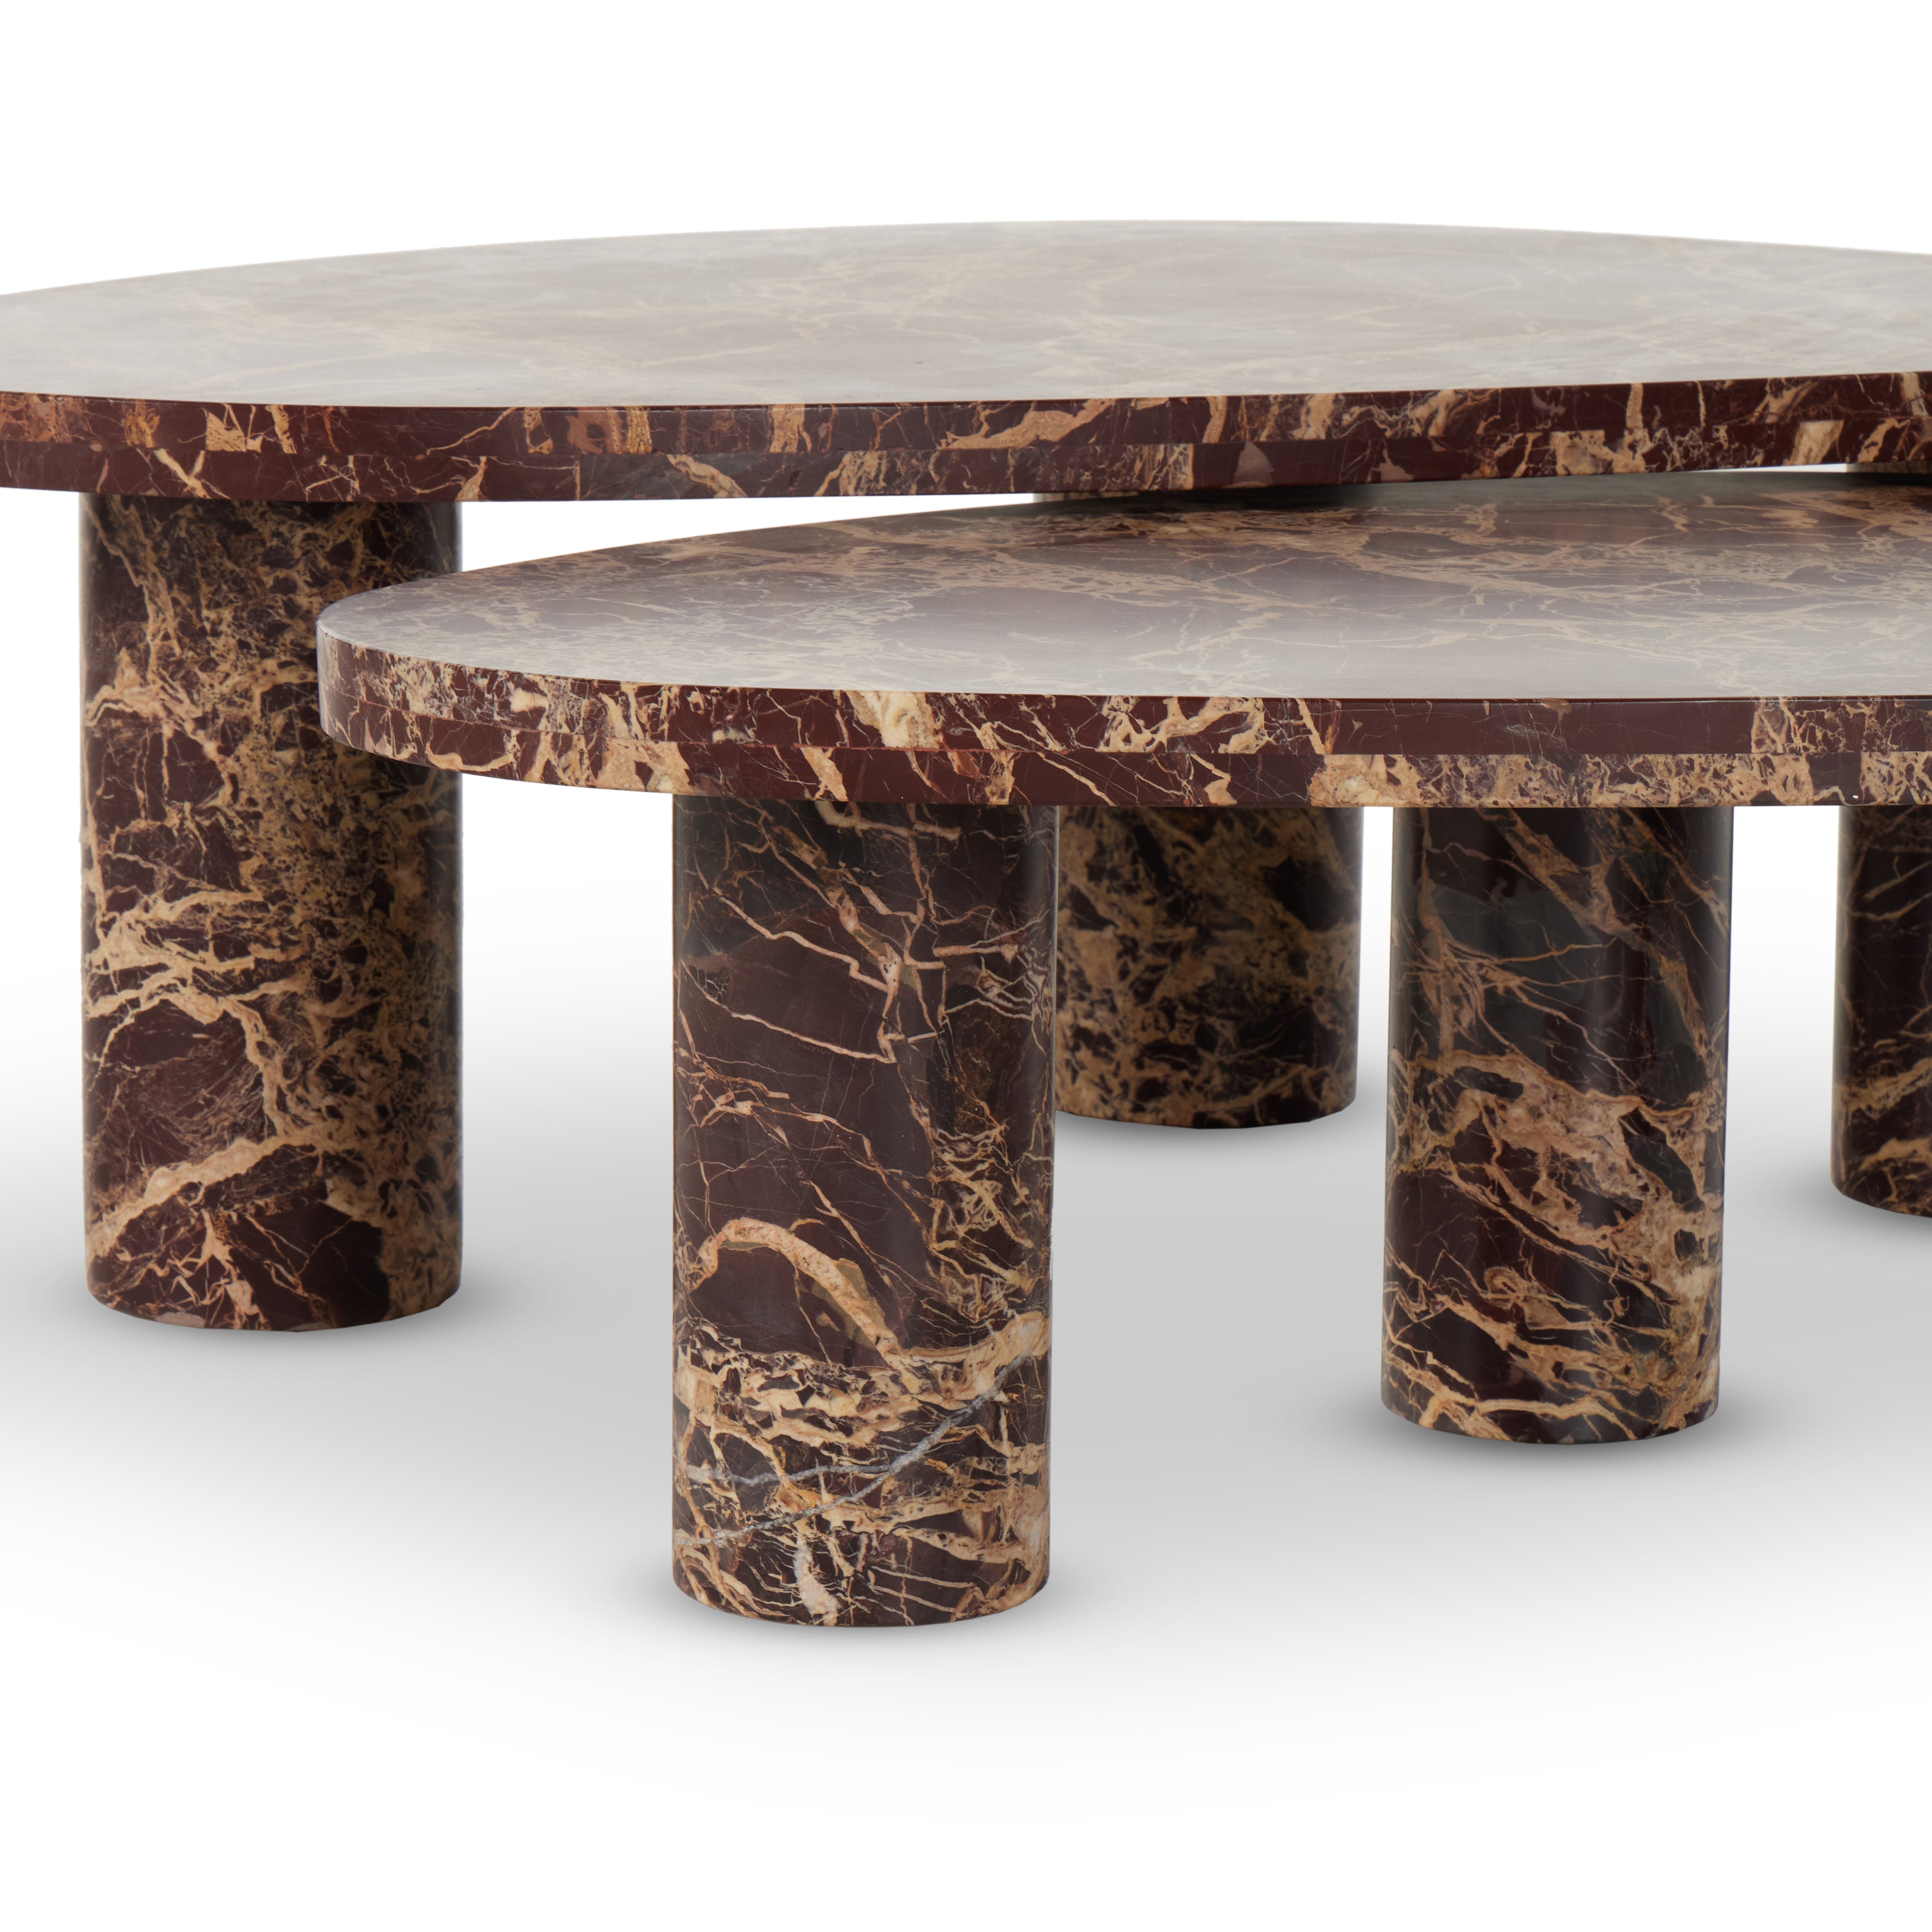 Made from solid marble with visible natural veining, turned pillar-style legs complement organically shaped tabletops, perfectly sized for nesting. Option to buy tables individually or together as a two-piece set. Amethyst Home provides interior design, new construction, custom furniture, and area rugs in the Miami metro area.